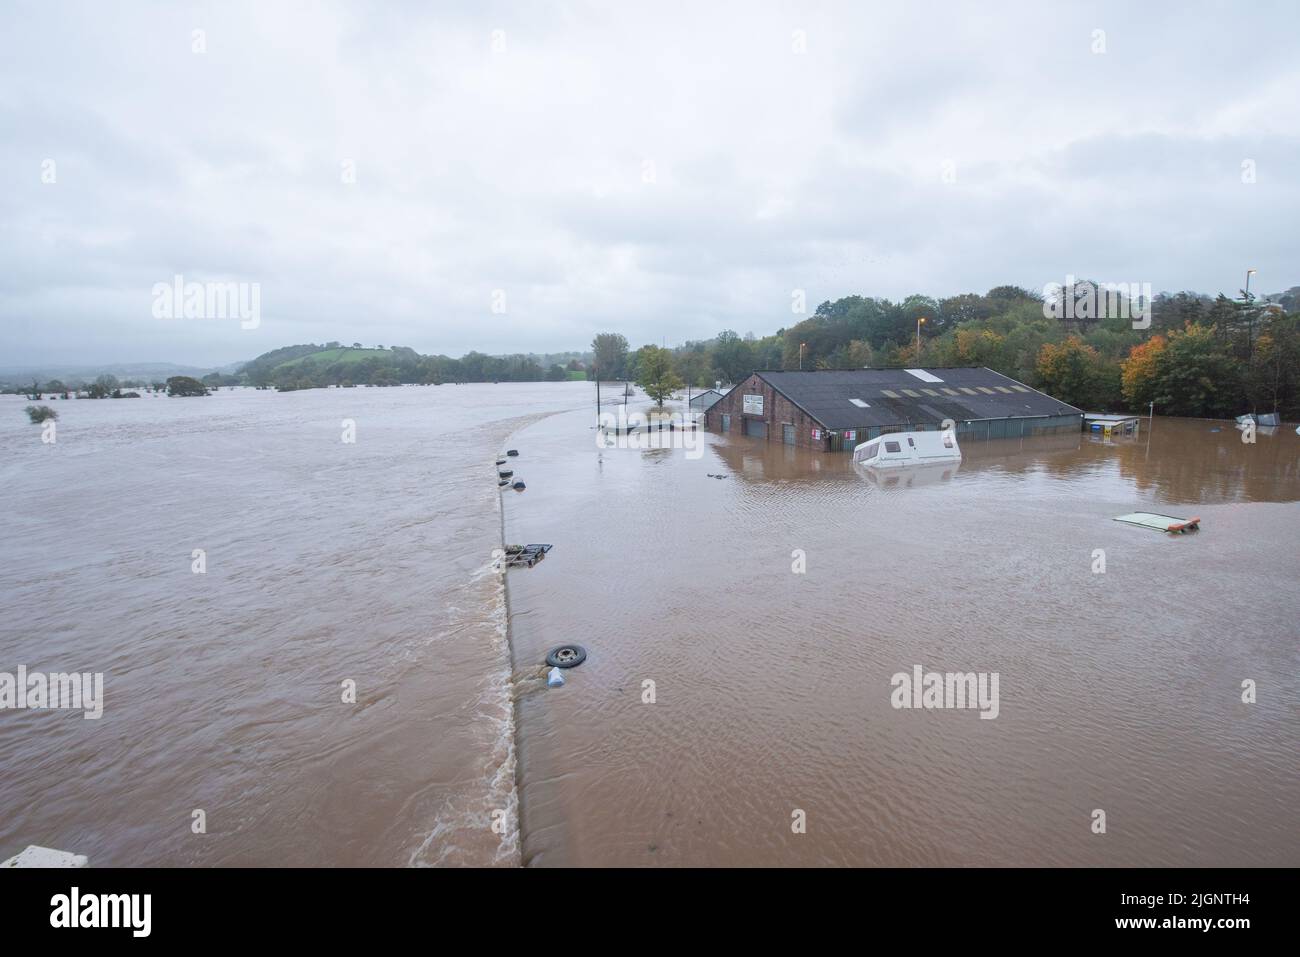 River Towy overcomes flood defences and inunbdates Ken Williams garage during Storm Callum 2018, Wales, UK Stock Photo